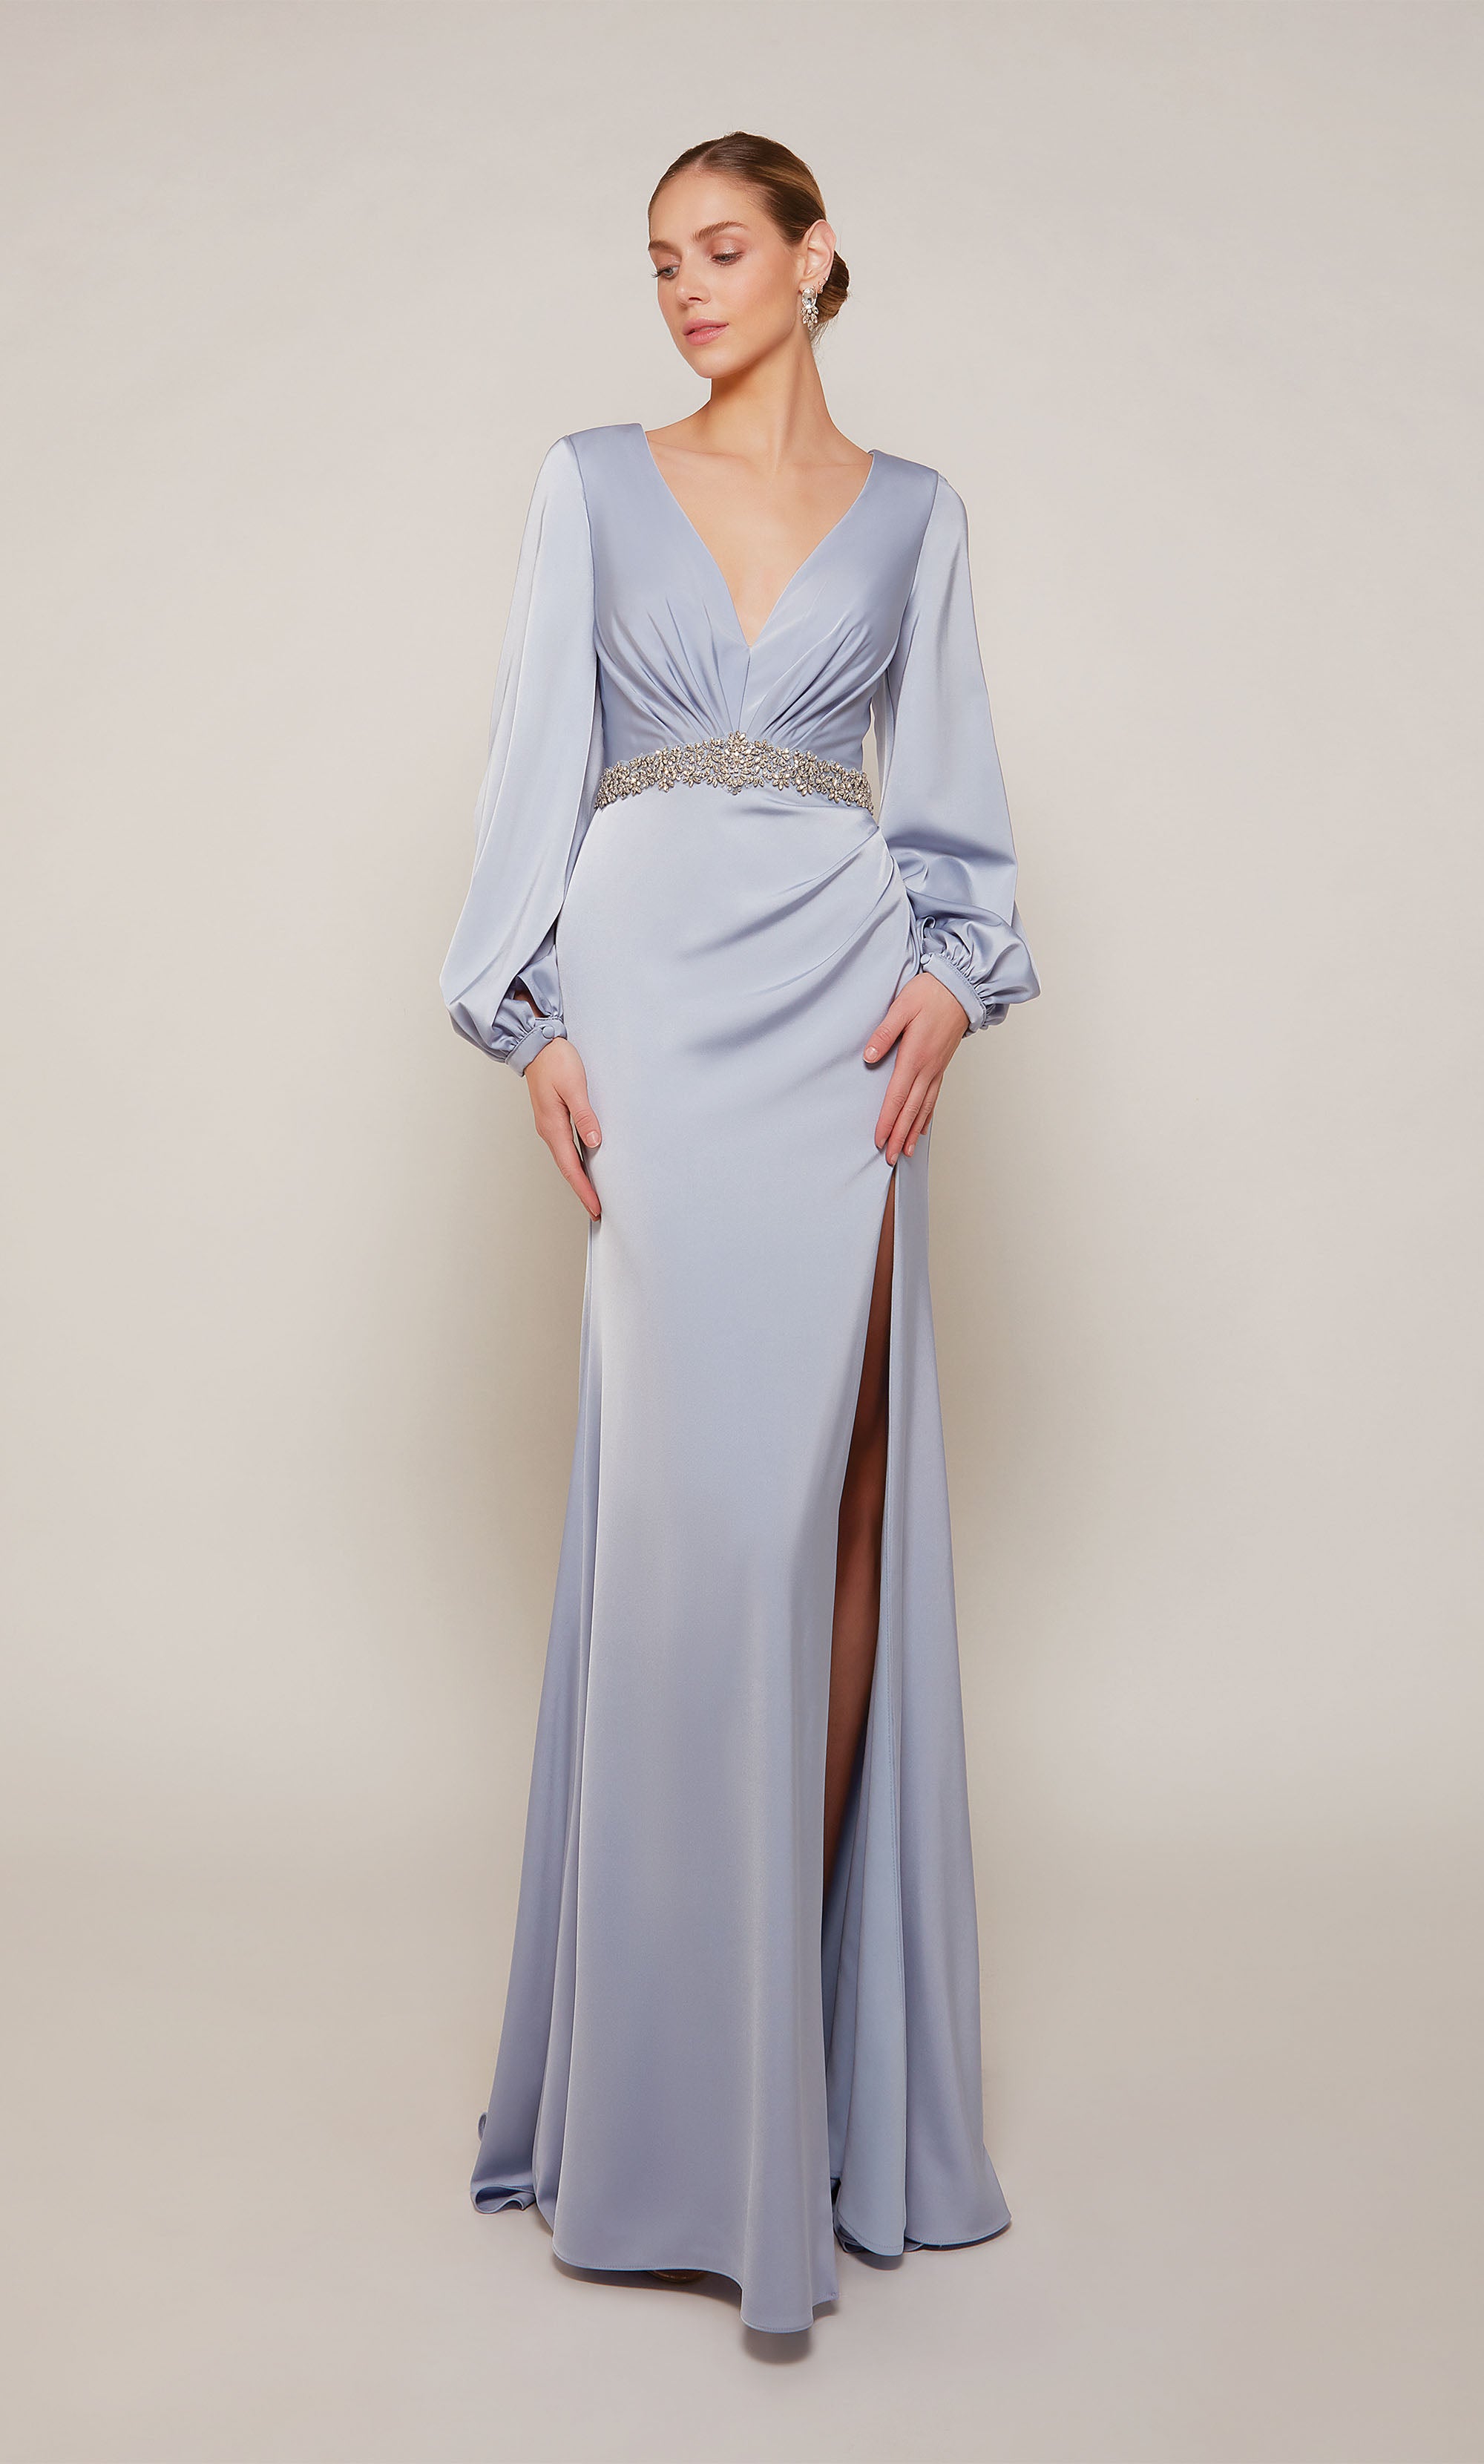 A chic, long sleeve, satin mother of the bride dress with a V-neckline, jeweled waistline, and side slit in french blue.